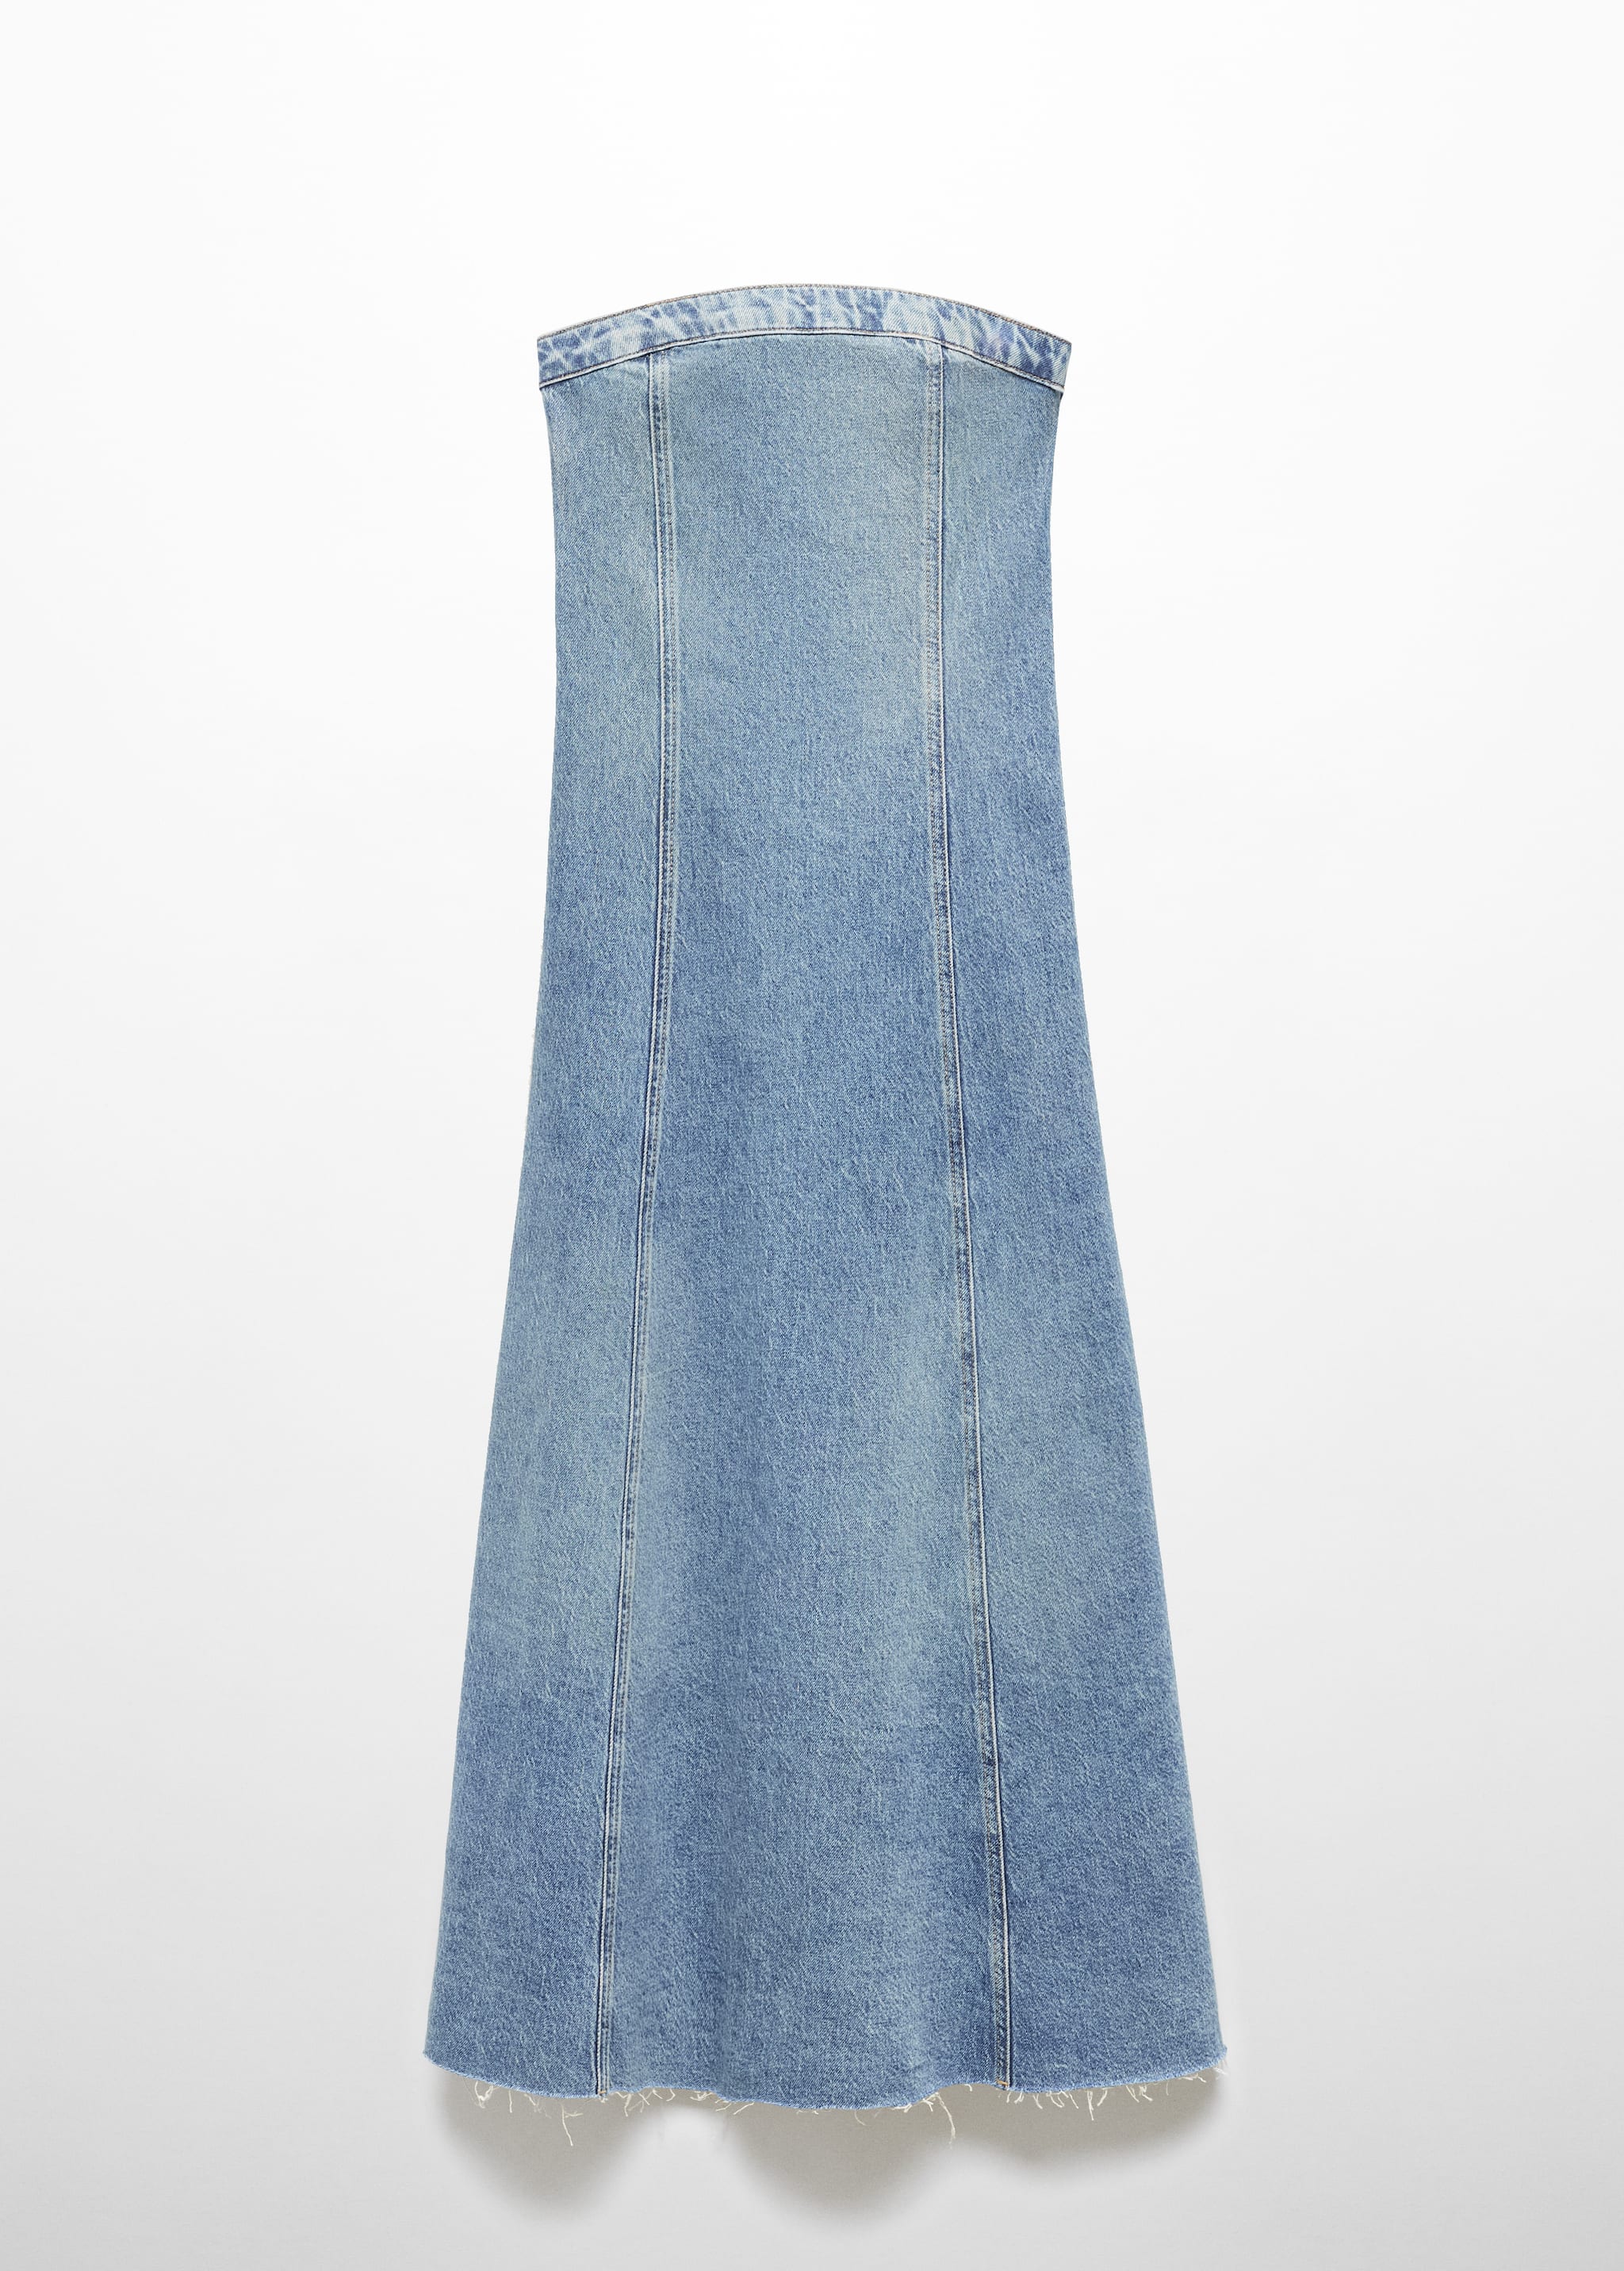 Strapless denim dress - Article without model